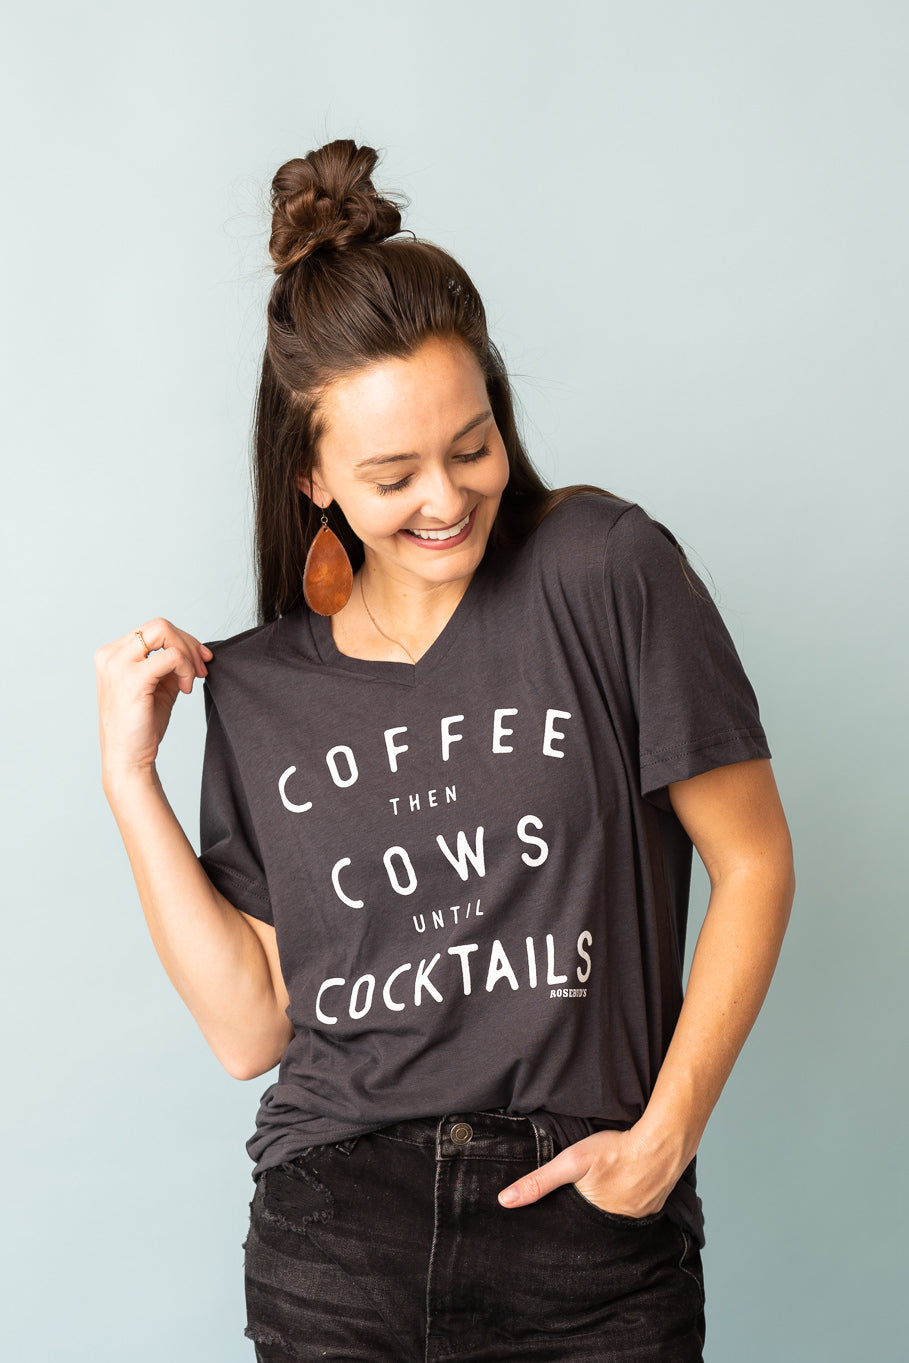 "Coffee then Cows until Cocktails" Graphic Tee - Rosebud's Tees